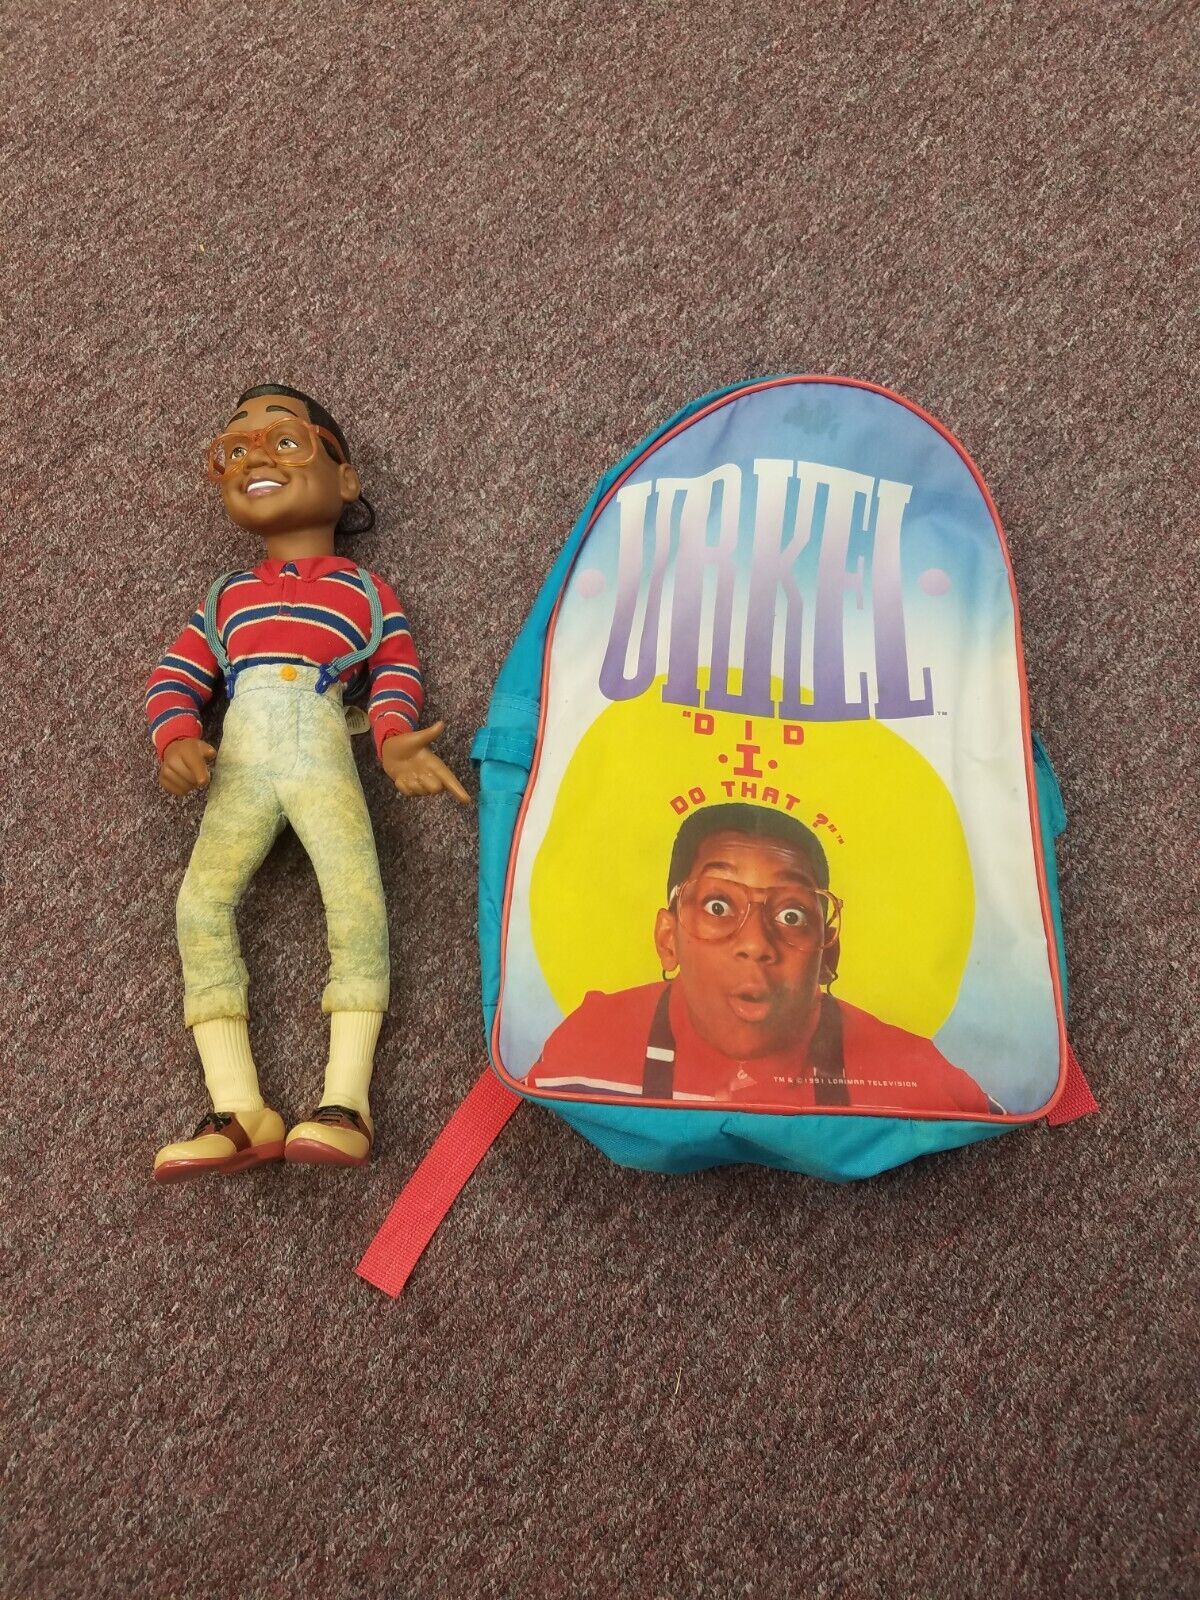 Vintage 1991 Steve Urkel Family Matters Backpack And Toy Both Preowned Rare 